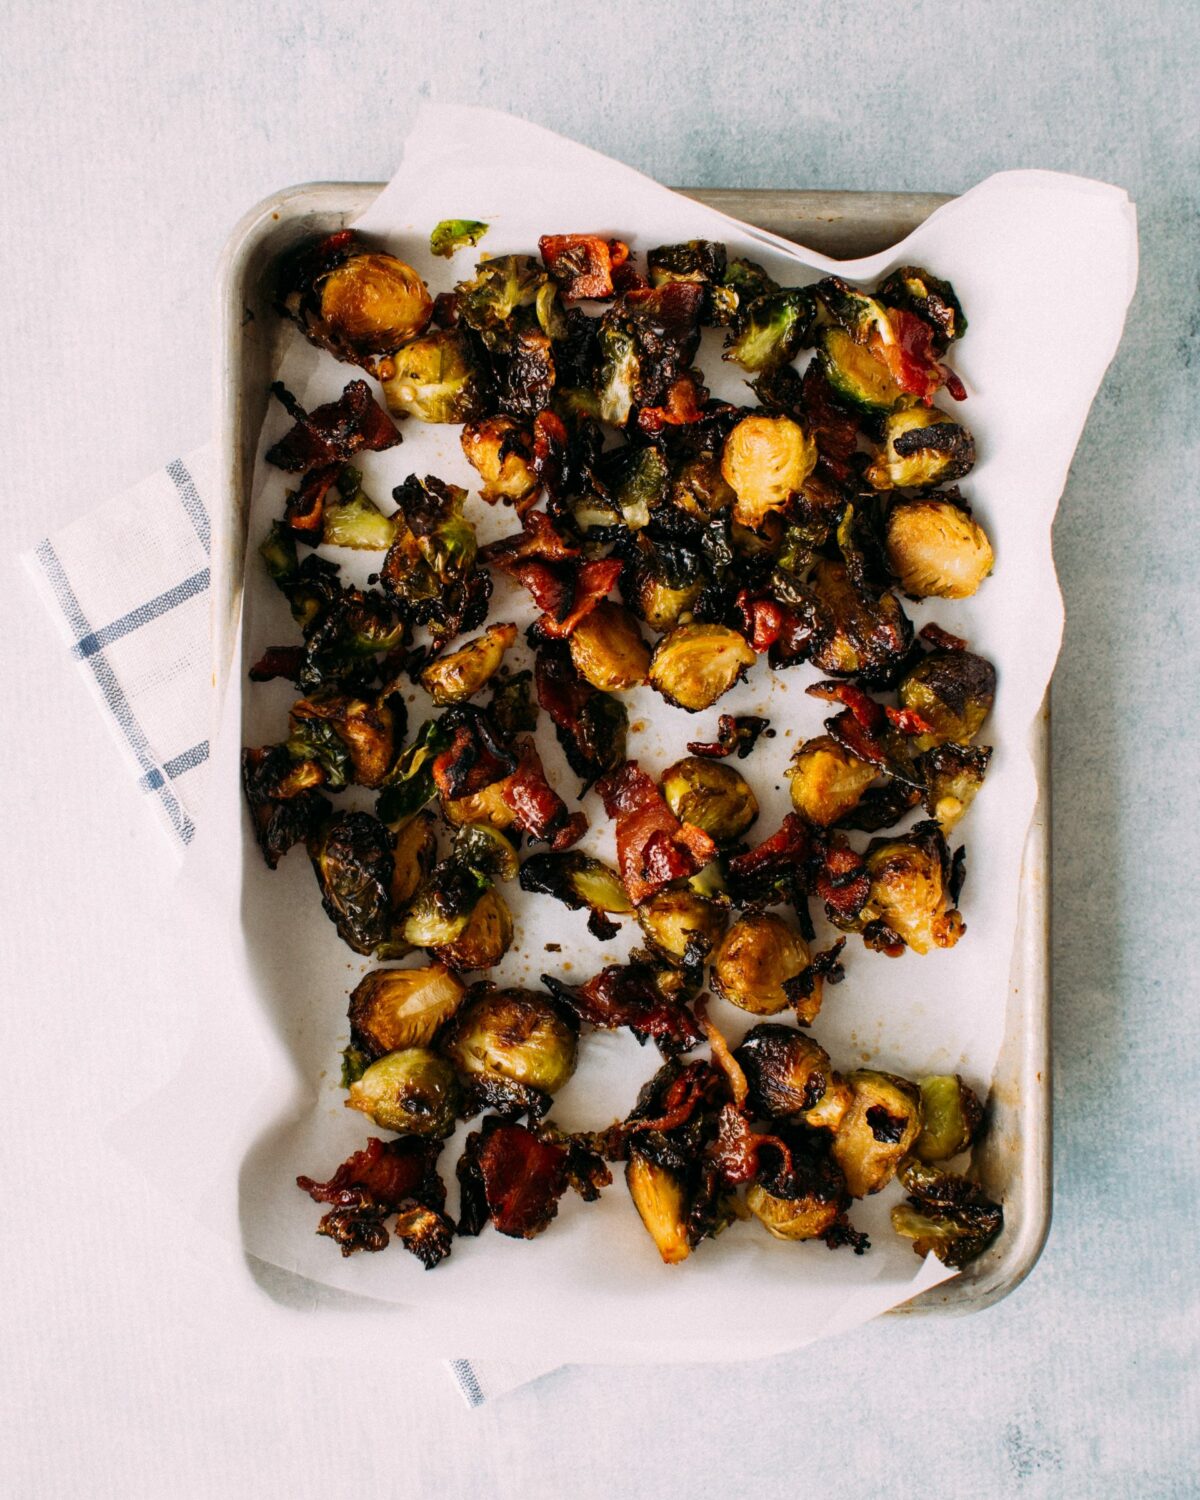 Baked roasted maple bacon brussels sprouts on parchment-lined baking sheet, on a tea towel.